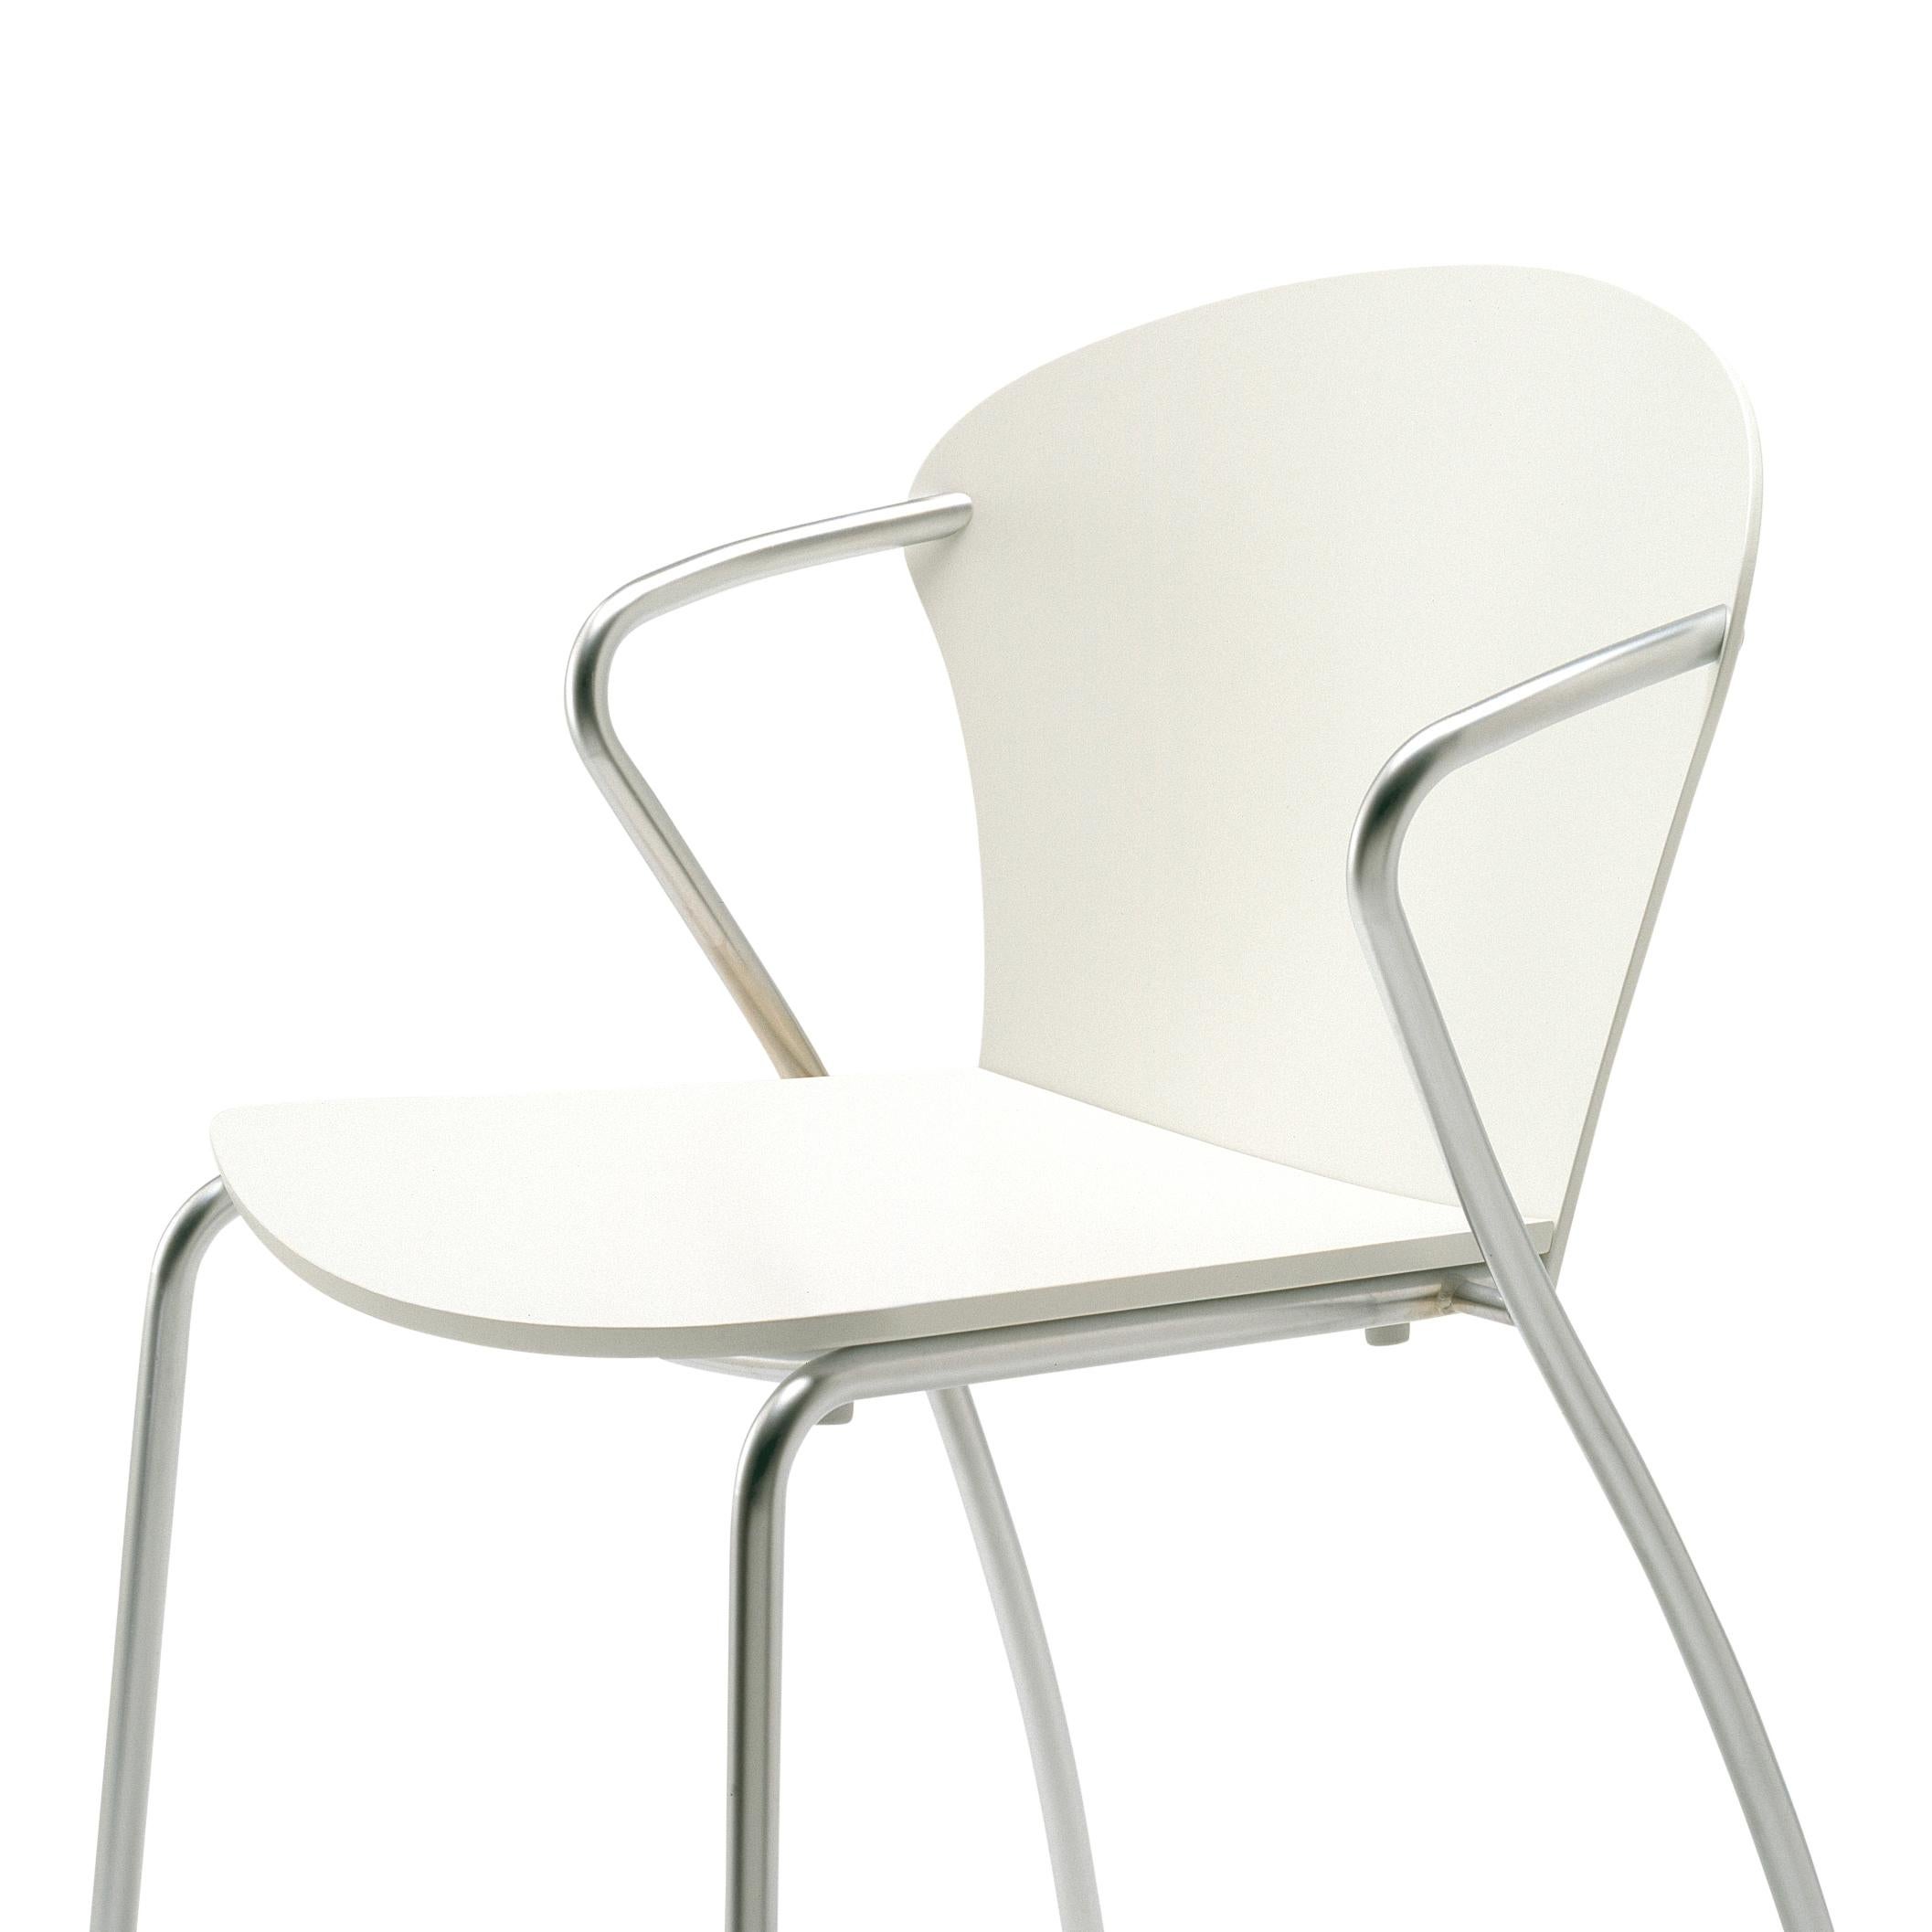 Bessi chair is a light, stackable chair designed by the Icelandic designer Erla Sólveig Óskarsdóttir in 2000.

The compact, yet feather light, expression of Bessi chair unites minimalistic design and comfort. The frame offers an integrated armrest